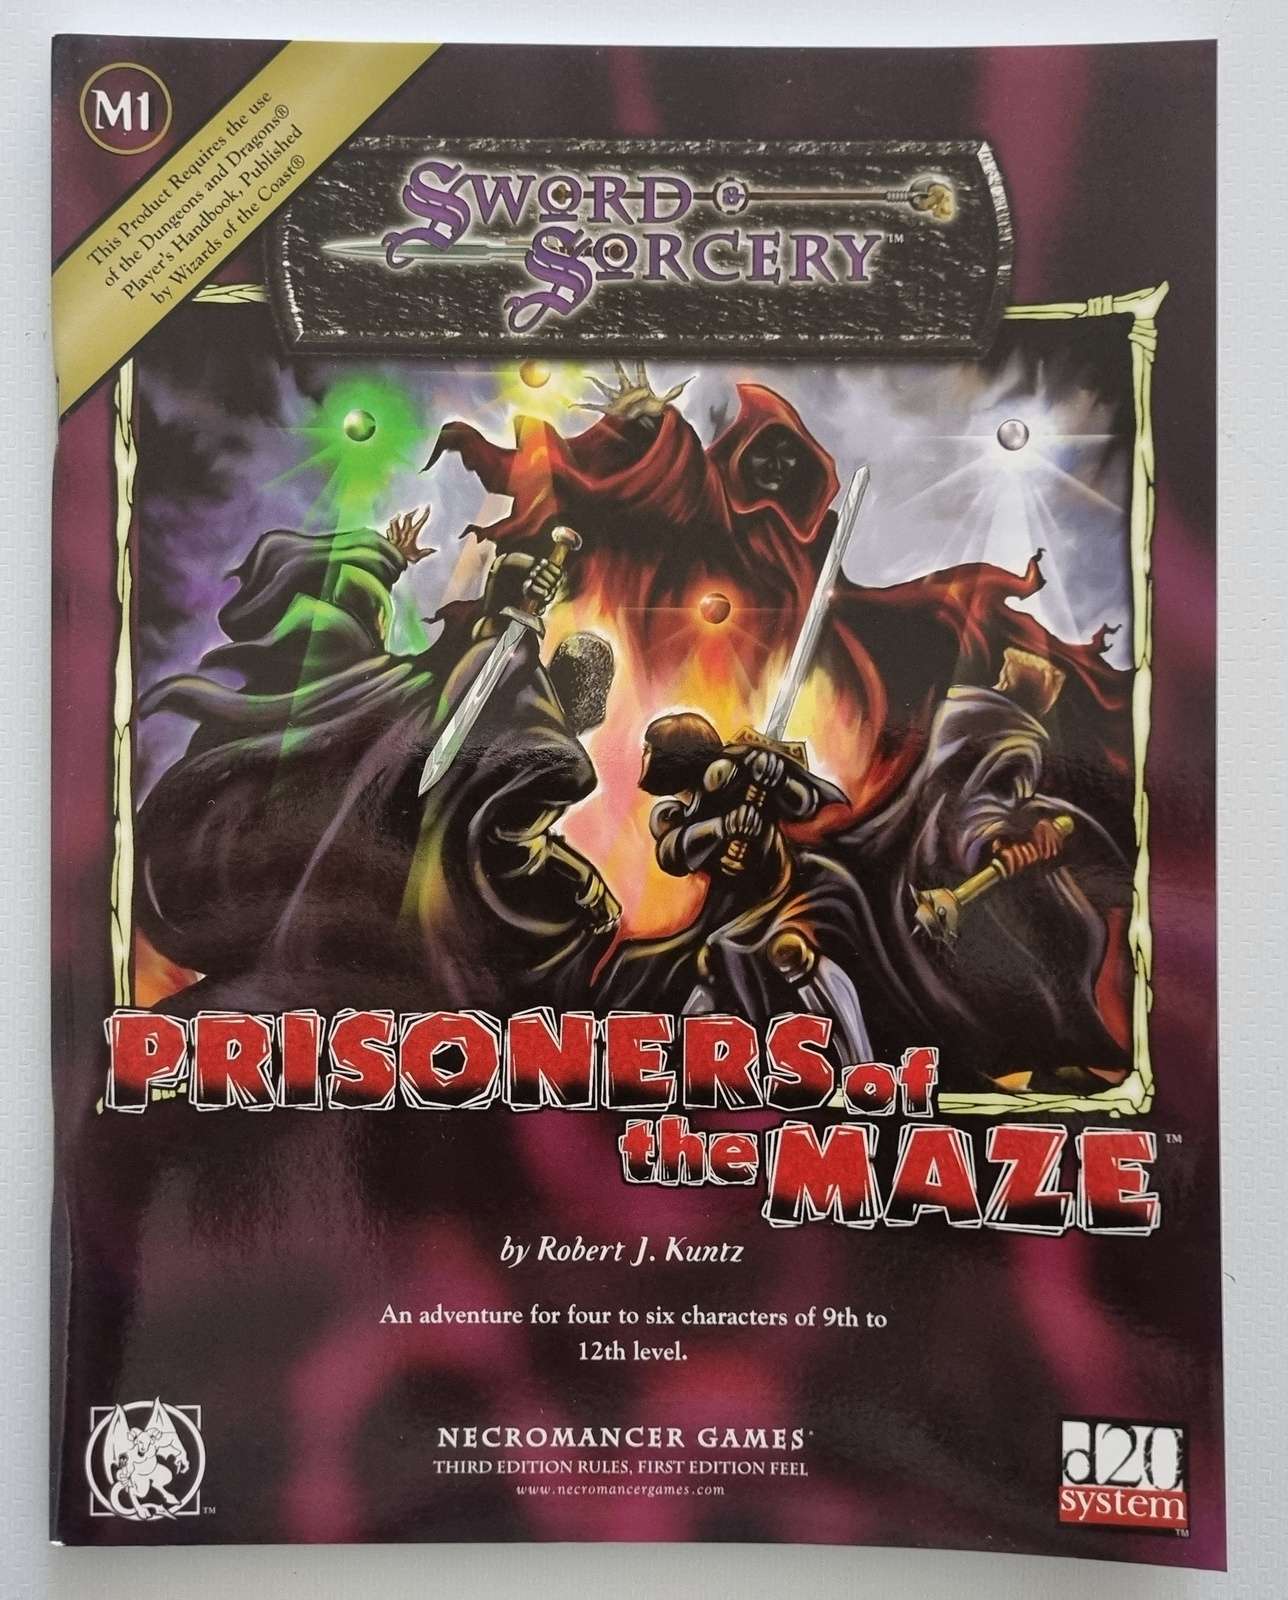 Sword & Sorcery: Prisoners of the Maze (D20 System)